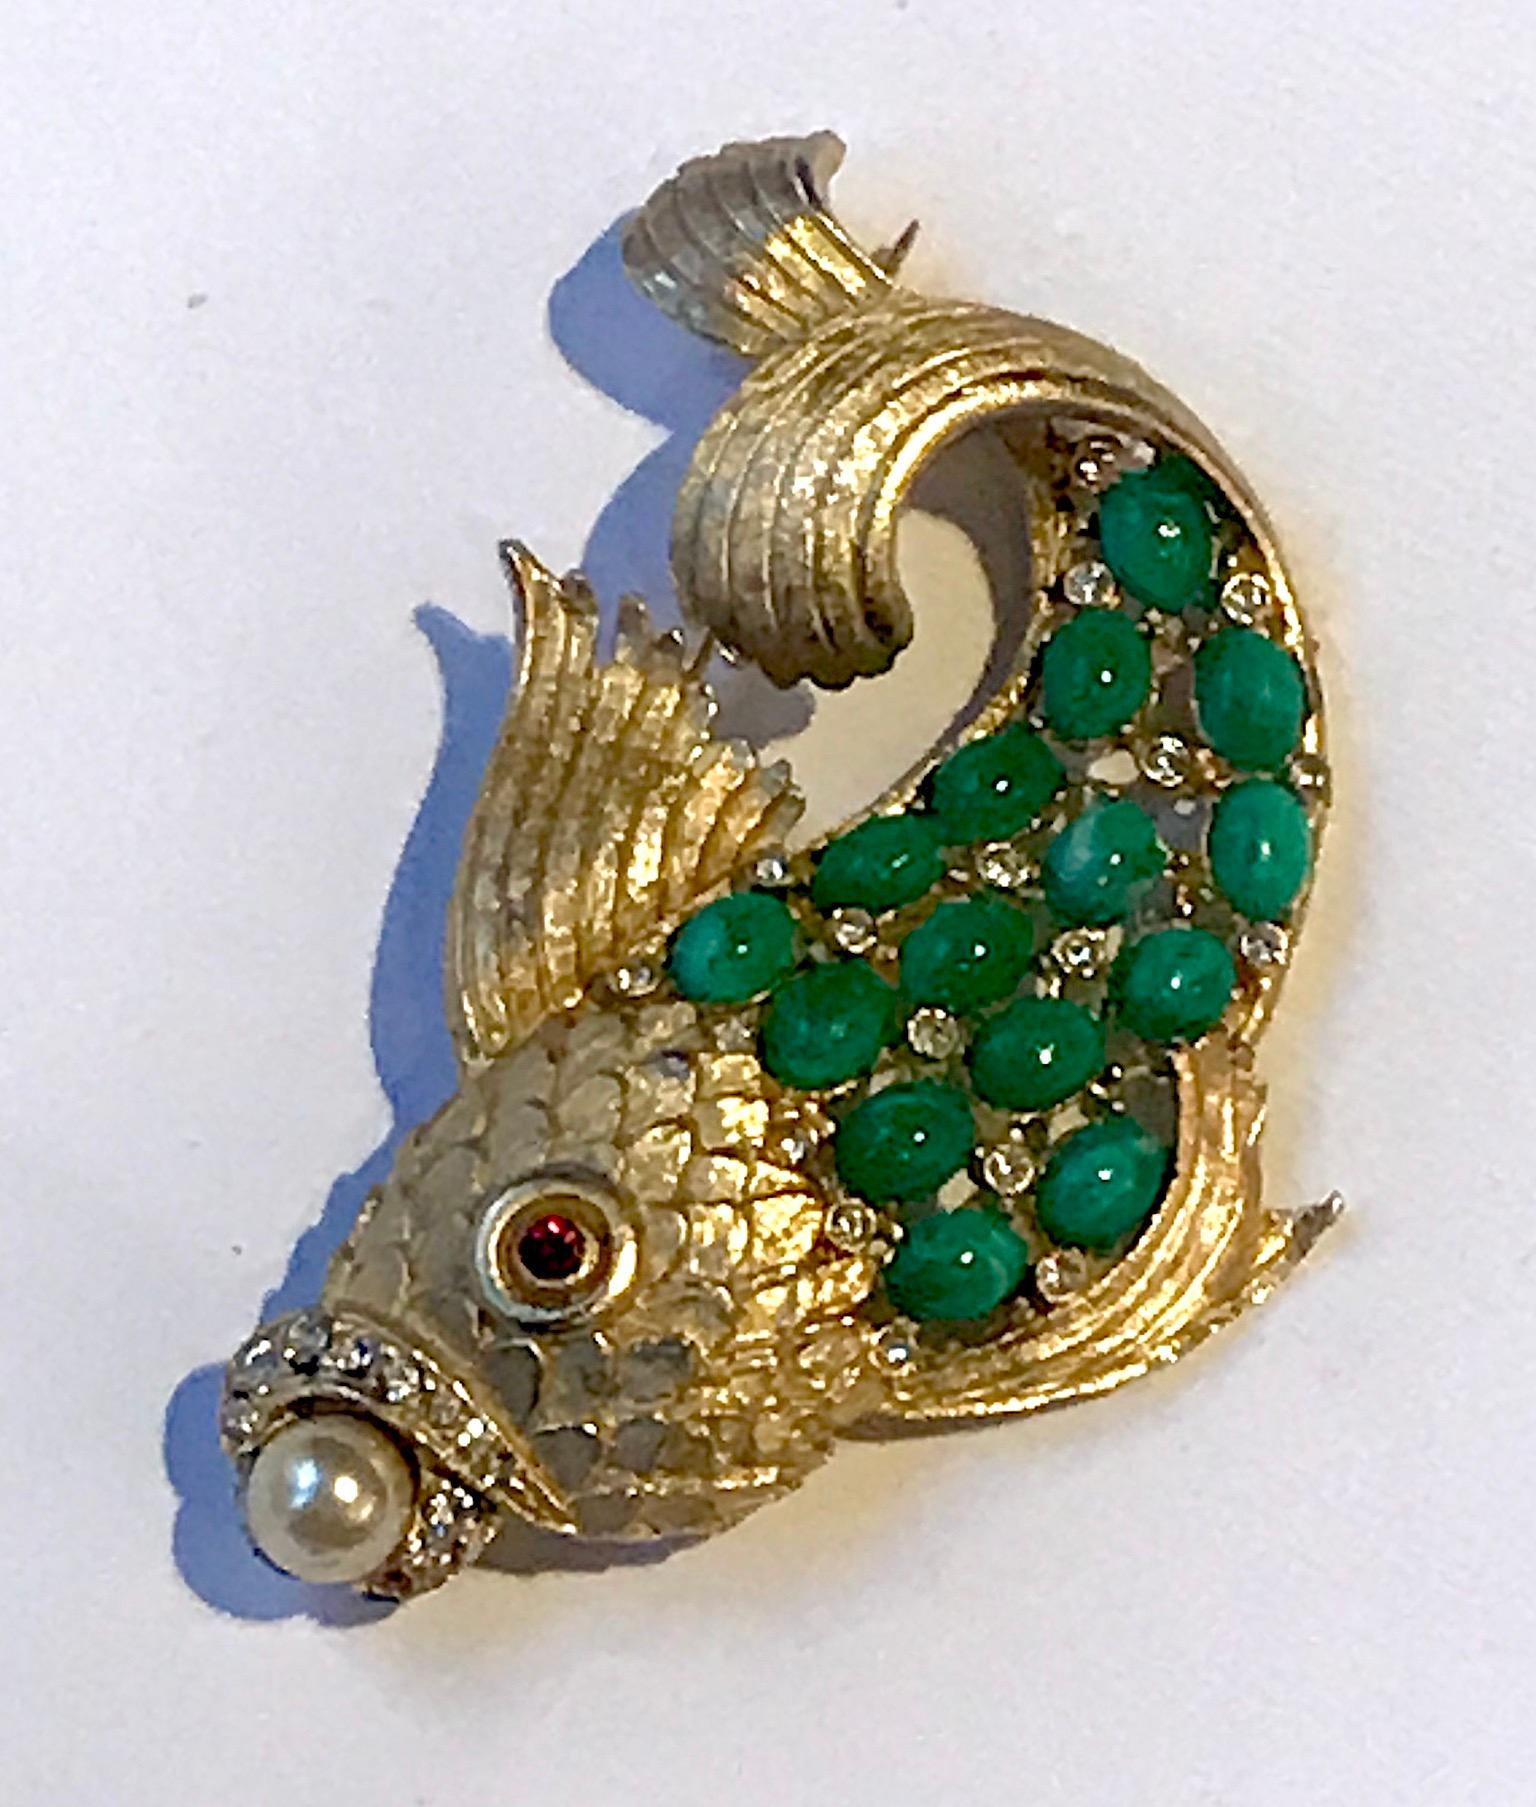 A very nicely executed fish brooch from the 1950s. The body of the fish is well cast with detail in the scales and fins. There is a lovely sweeping motion in the curl of the tail and then end of the fins. The body of the fish is set with 4.5 x 6.5